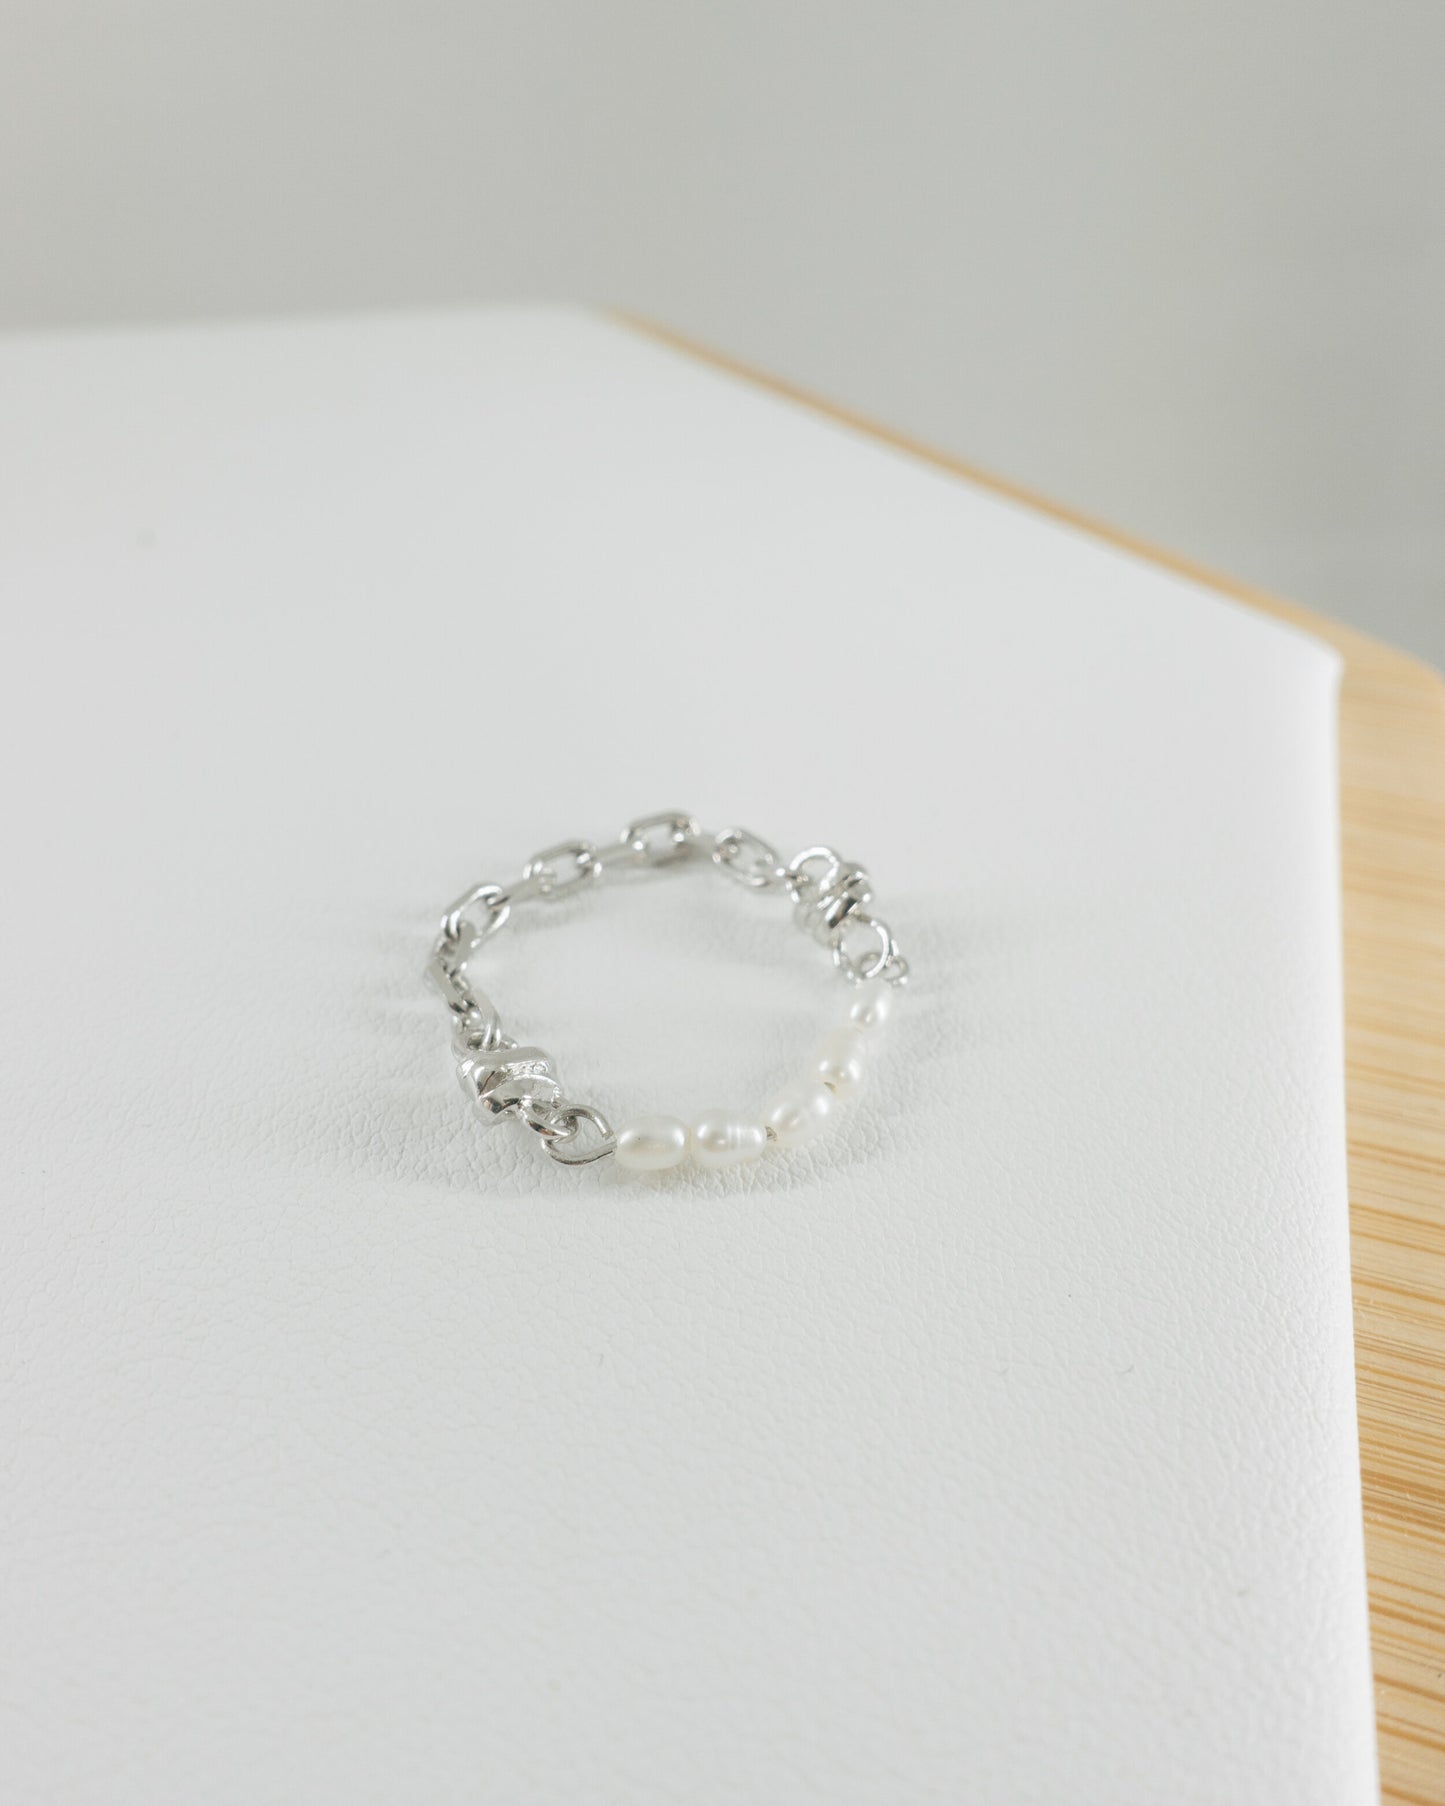 "Dylan" freshwater chain links ring